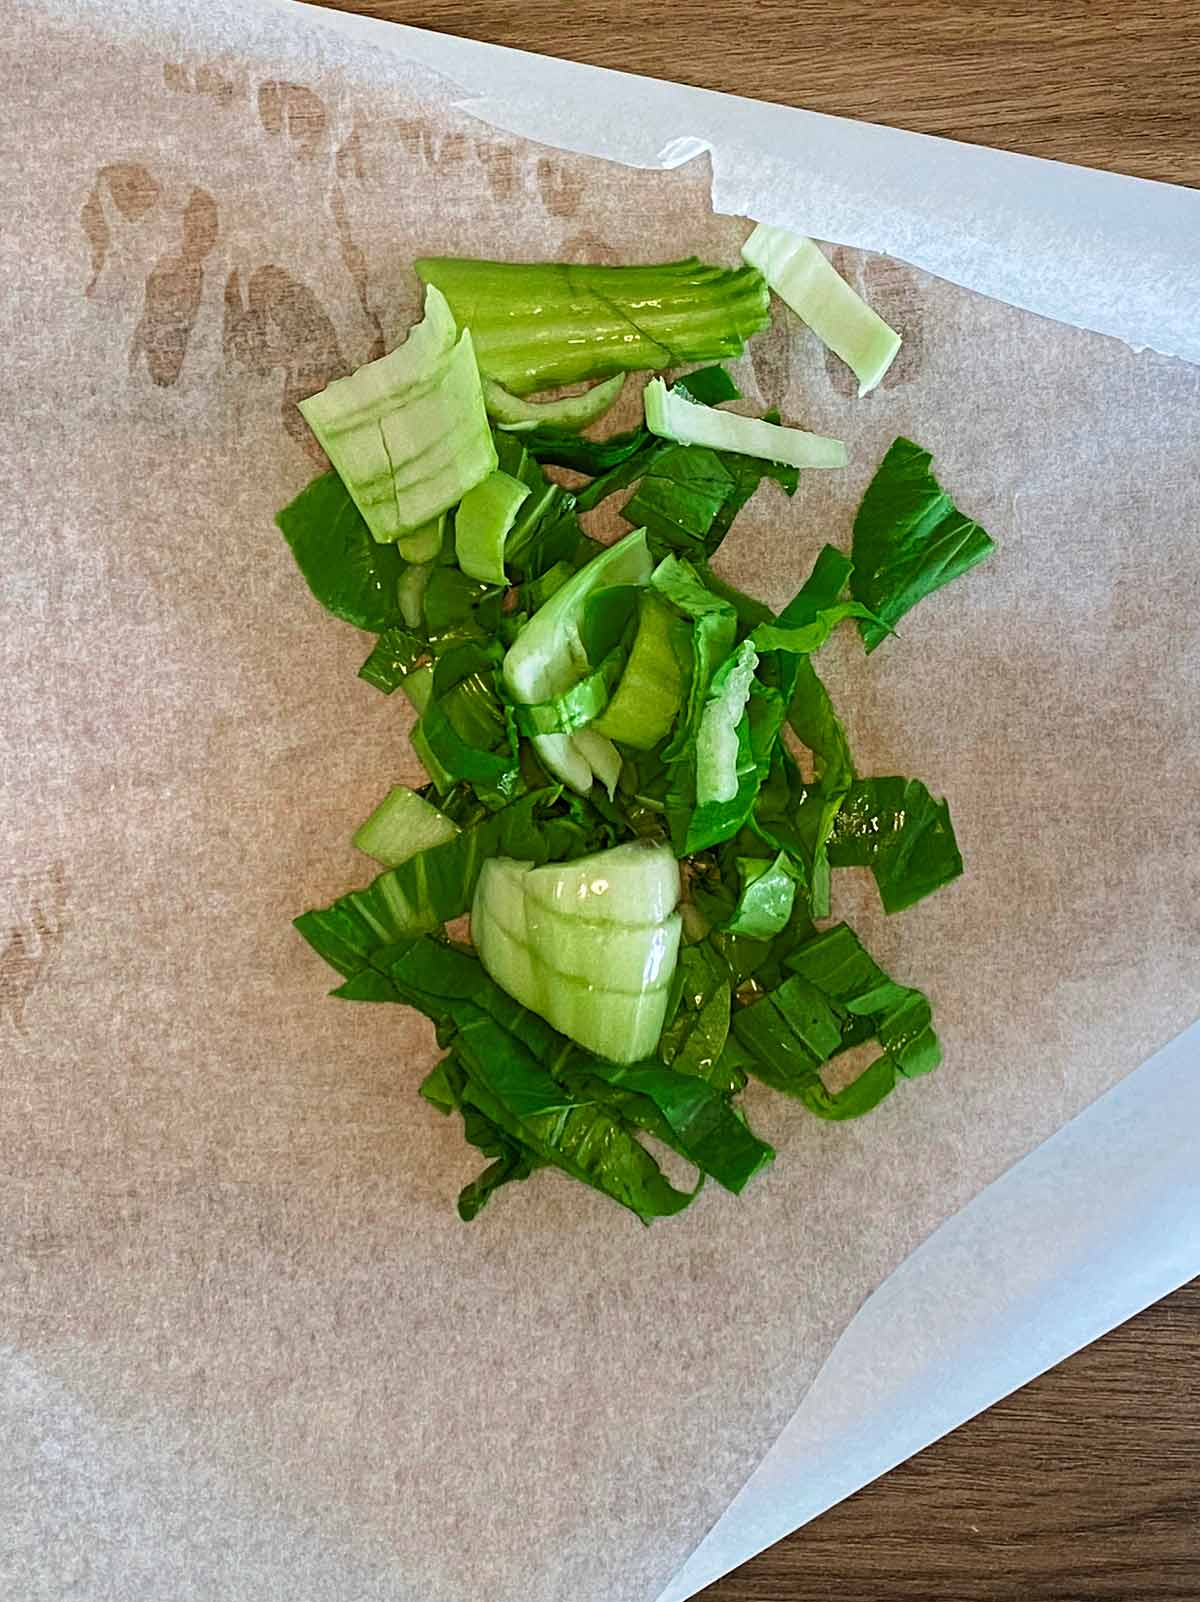 Parchment paper with chopped pak choi on it.